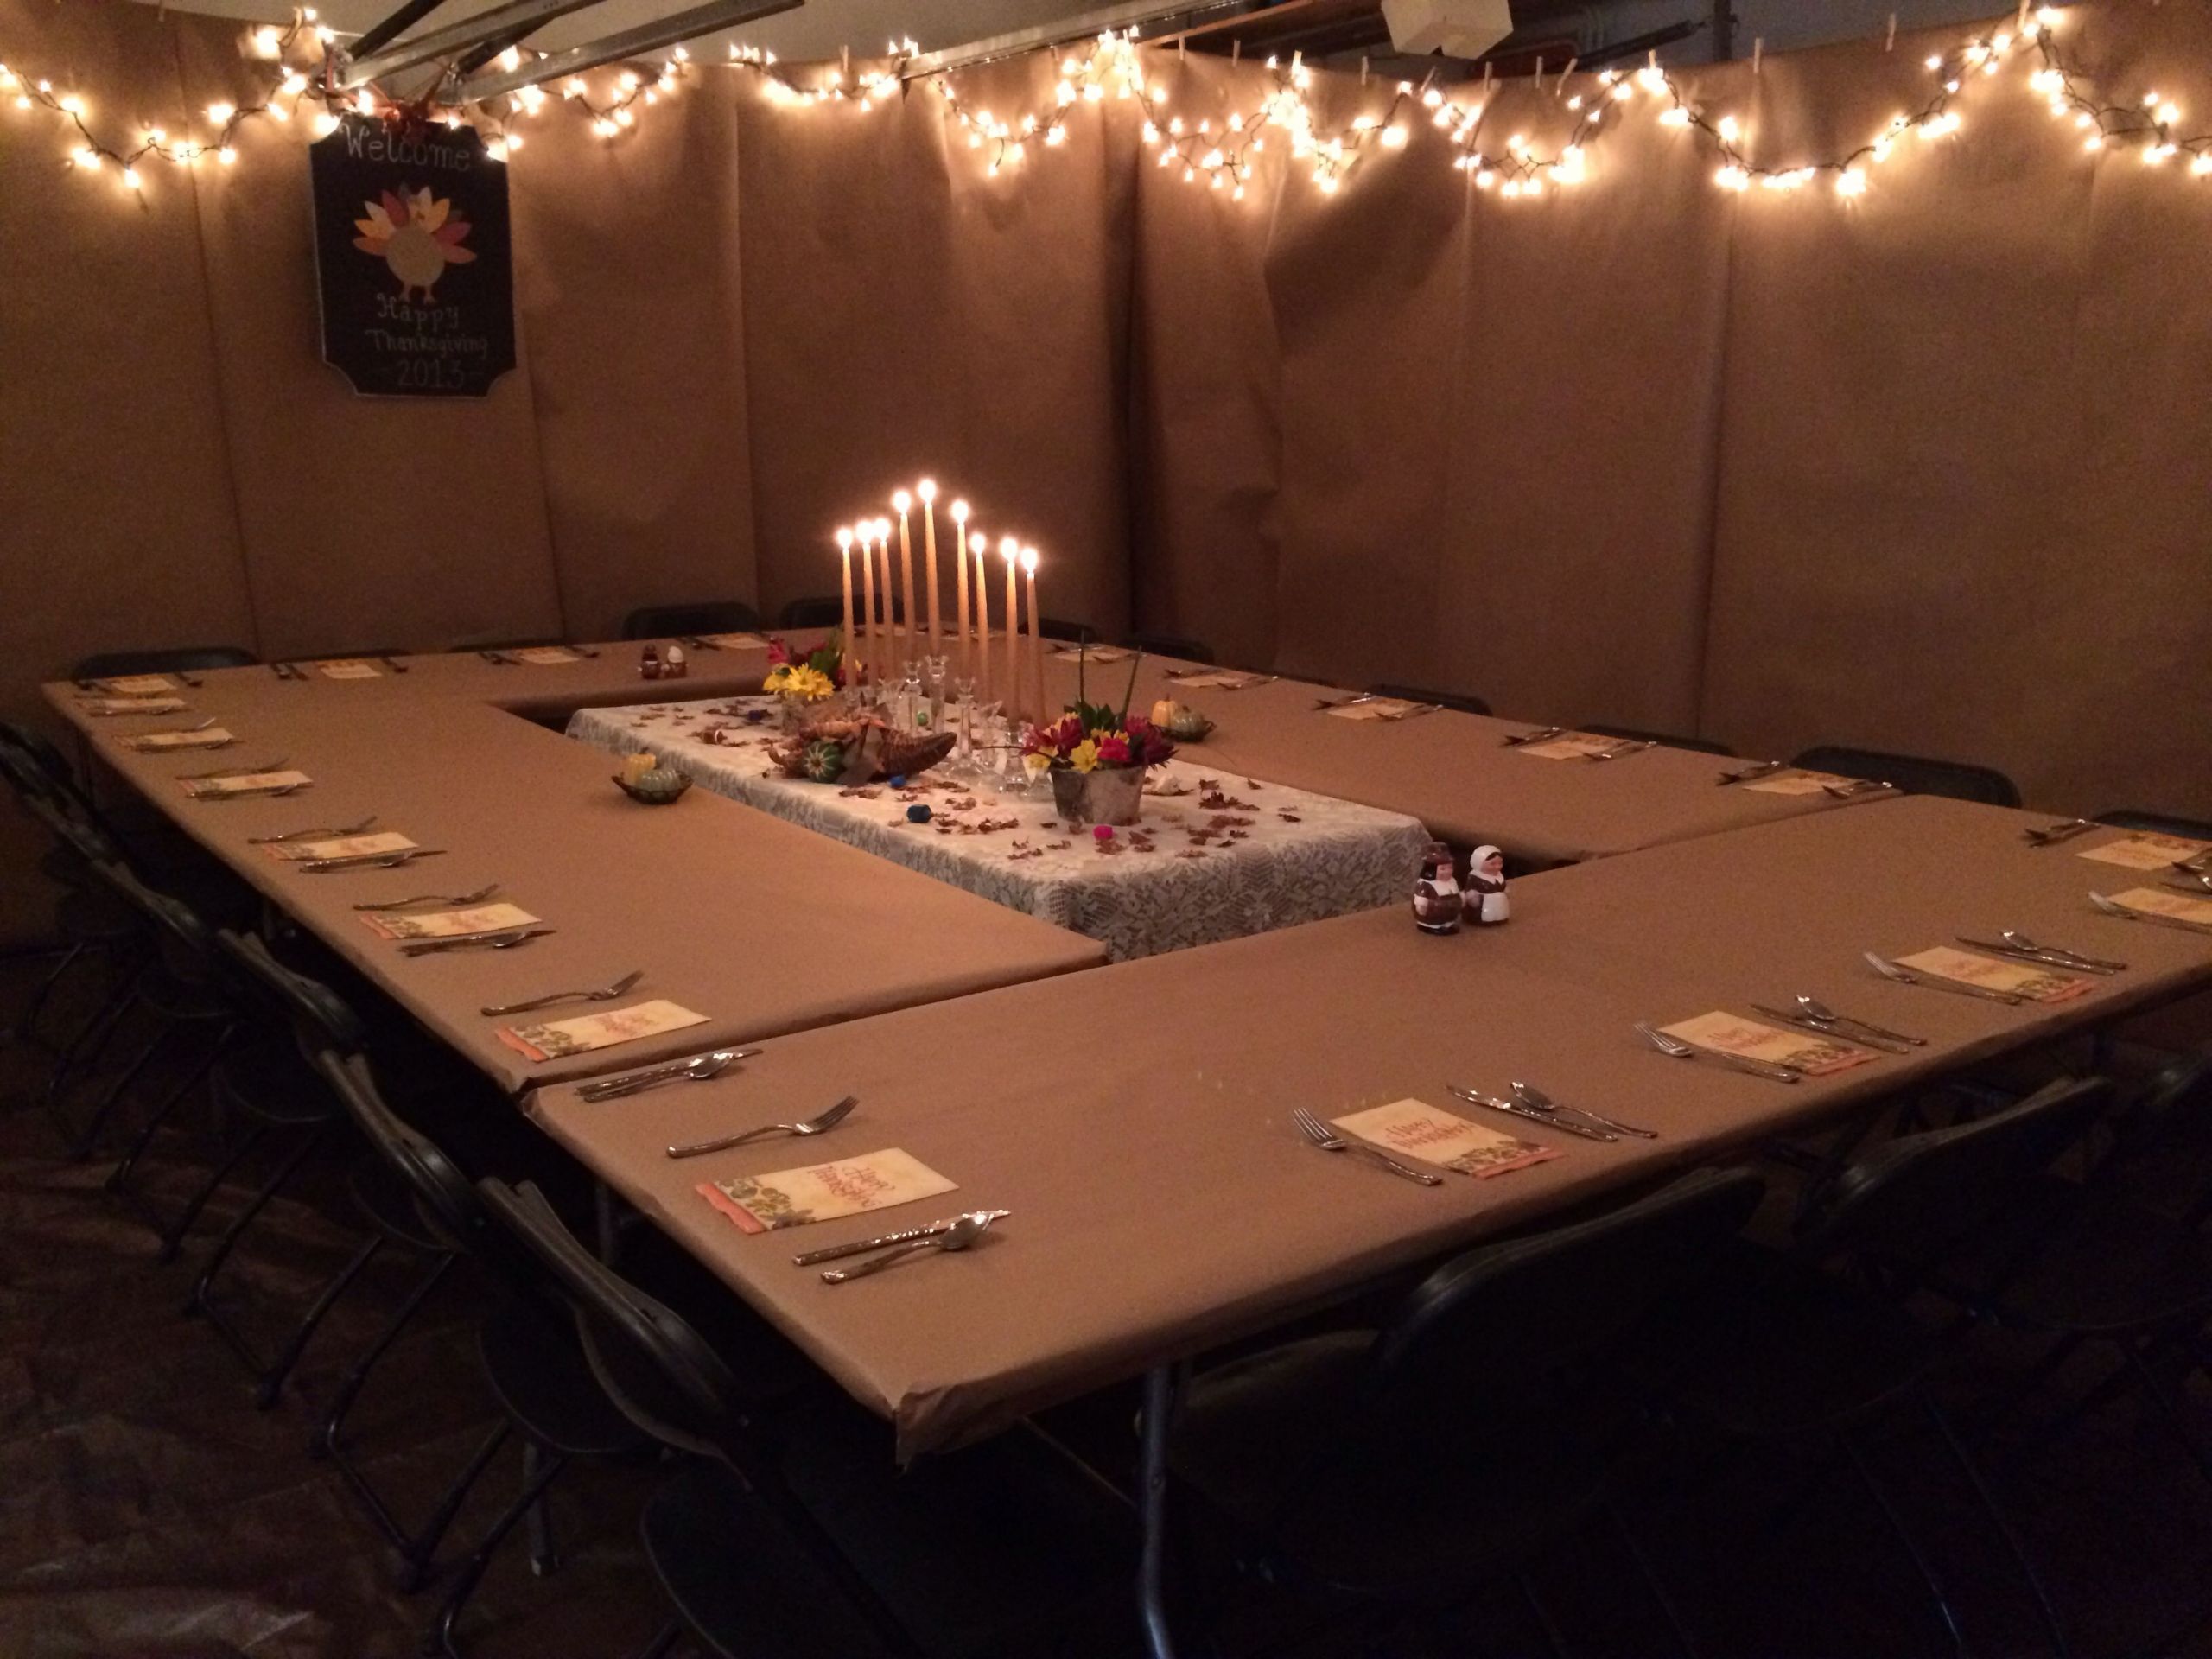 Large Party Dinner Ideas
 Great idea for large dinner party in the garage